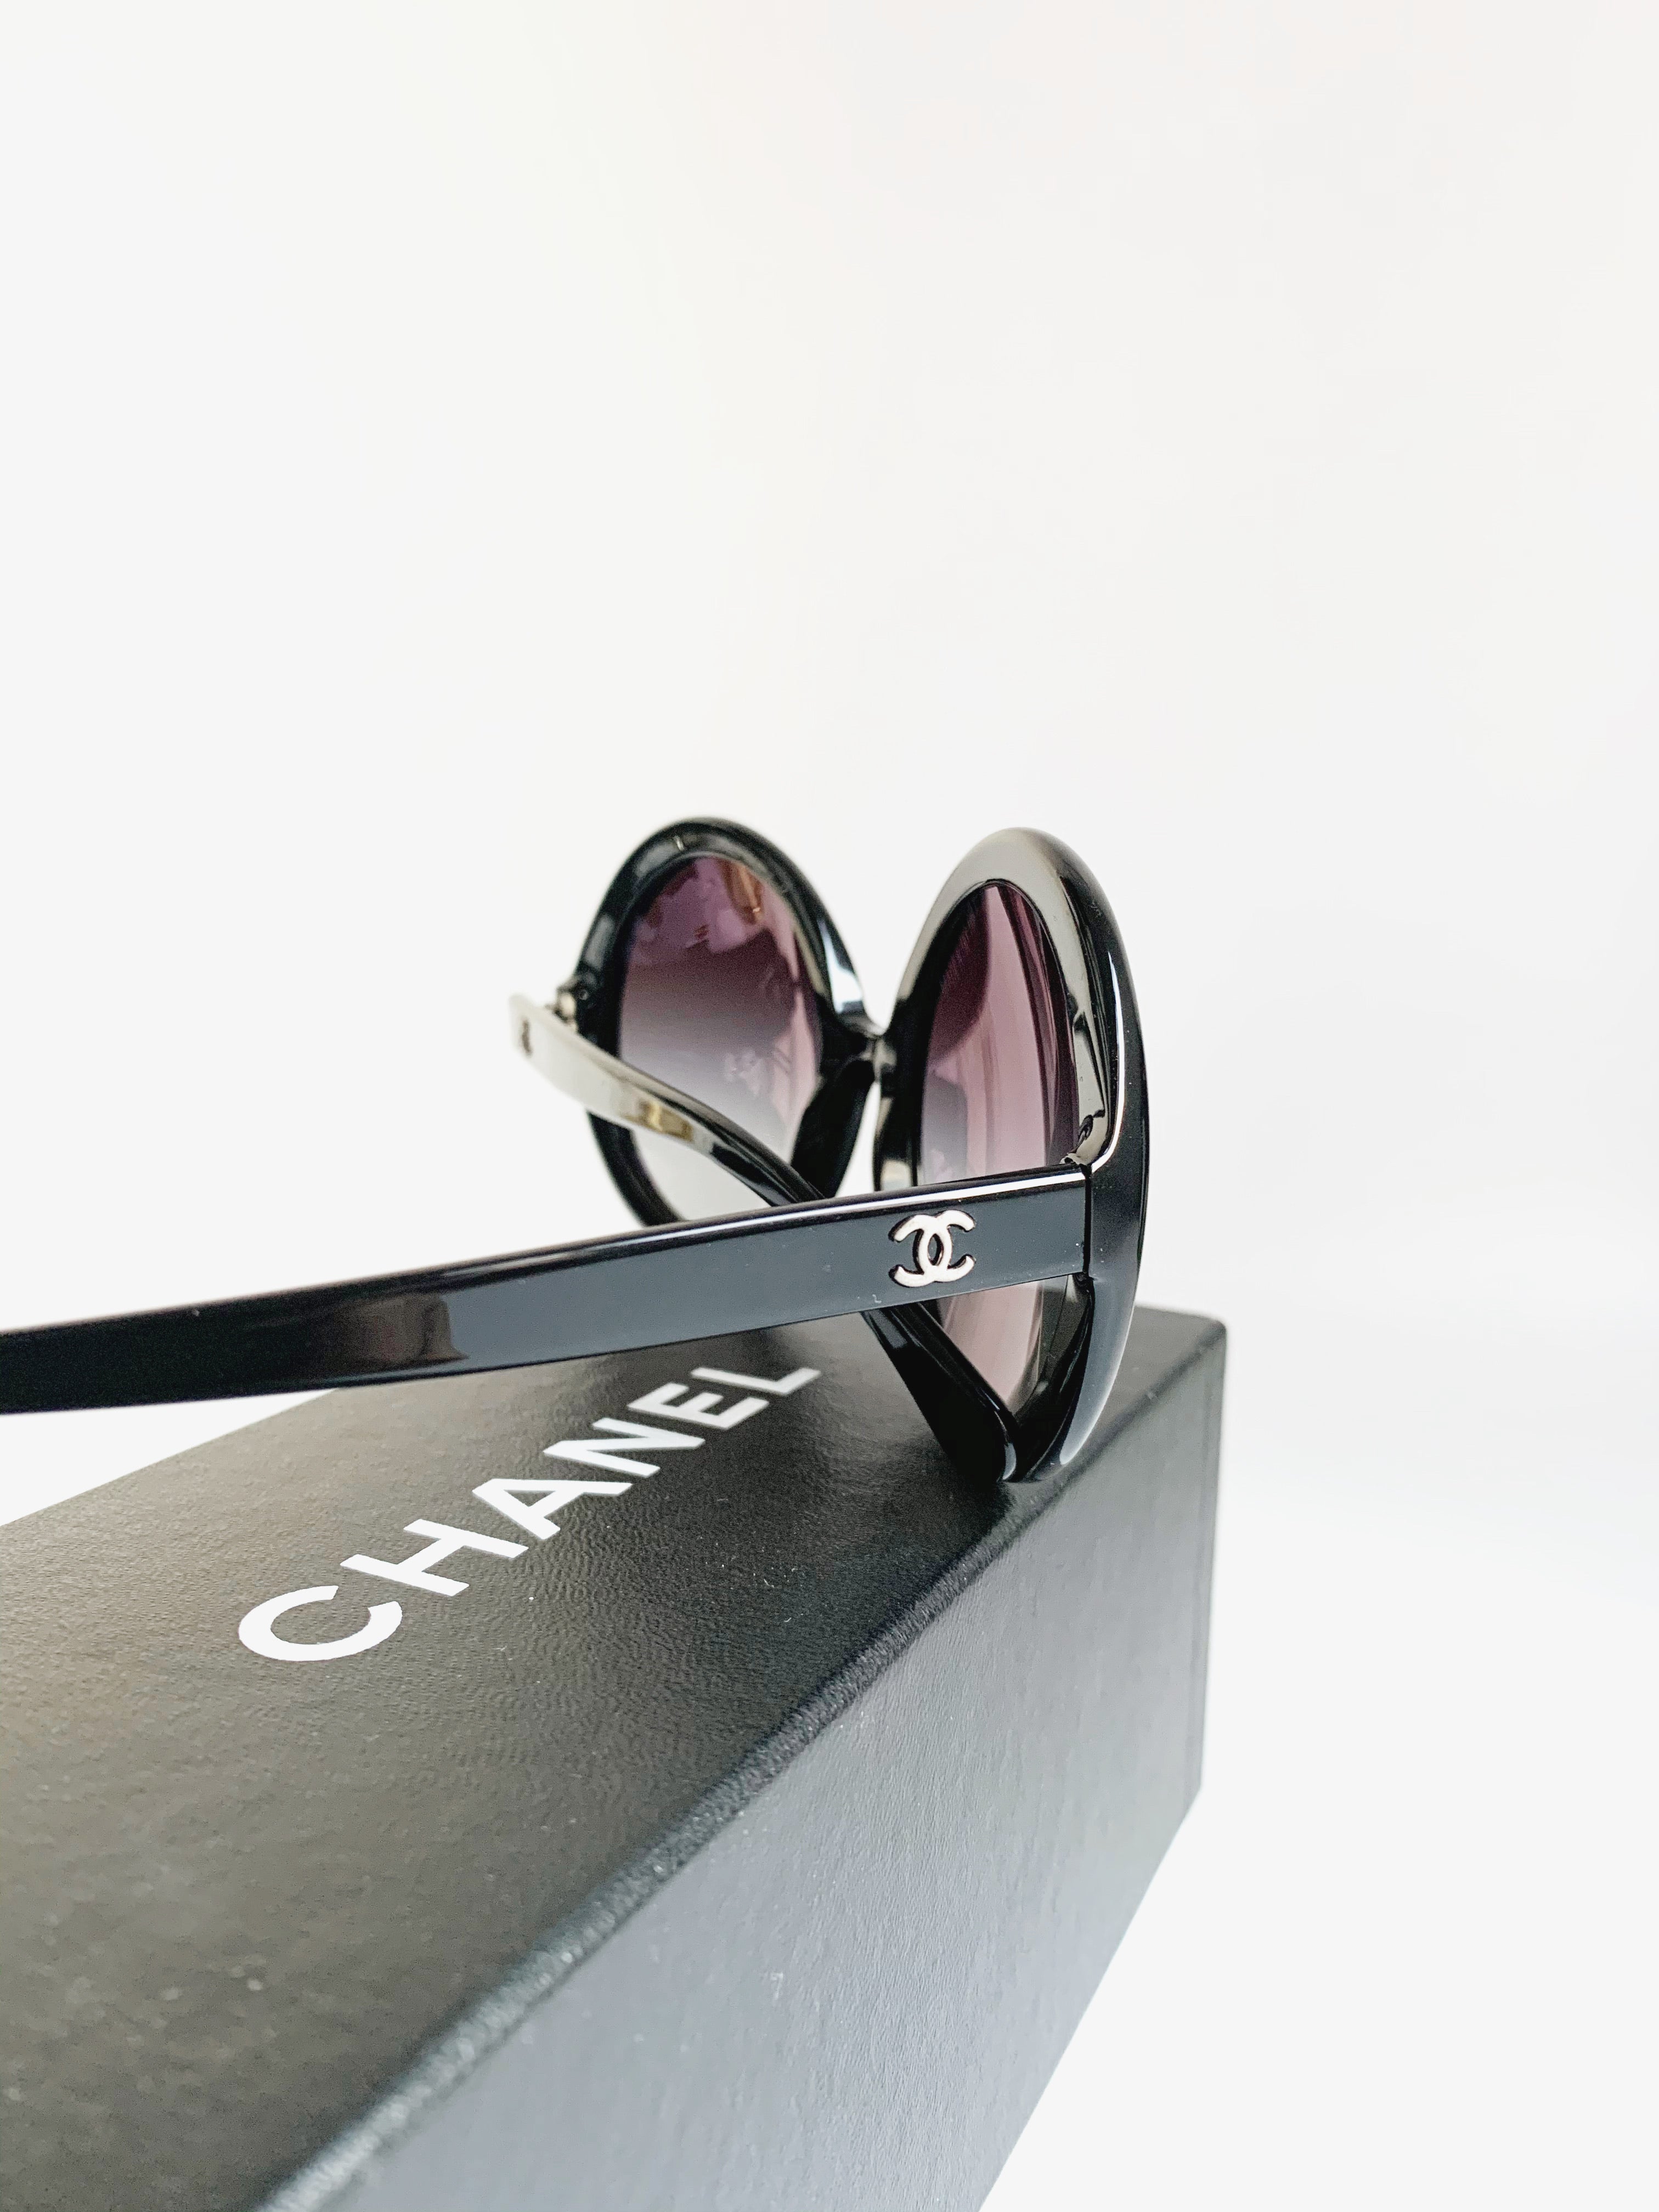 Auth CHANEL Vintage Gold CC Logo Black Sunglasses 01450 94305 Used from  Japan